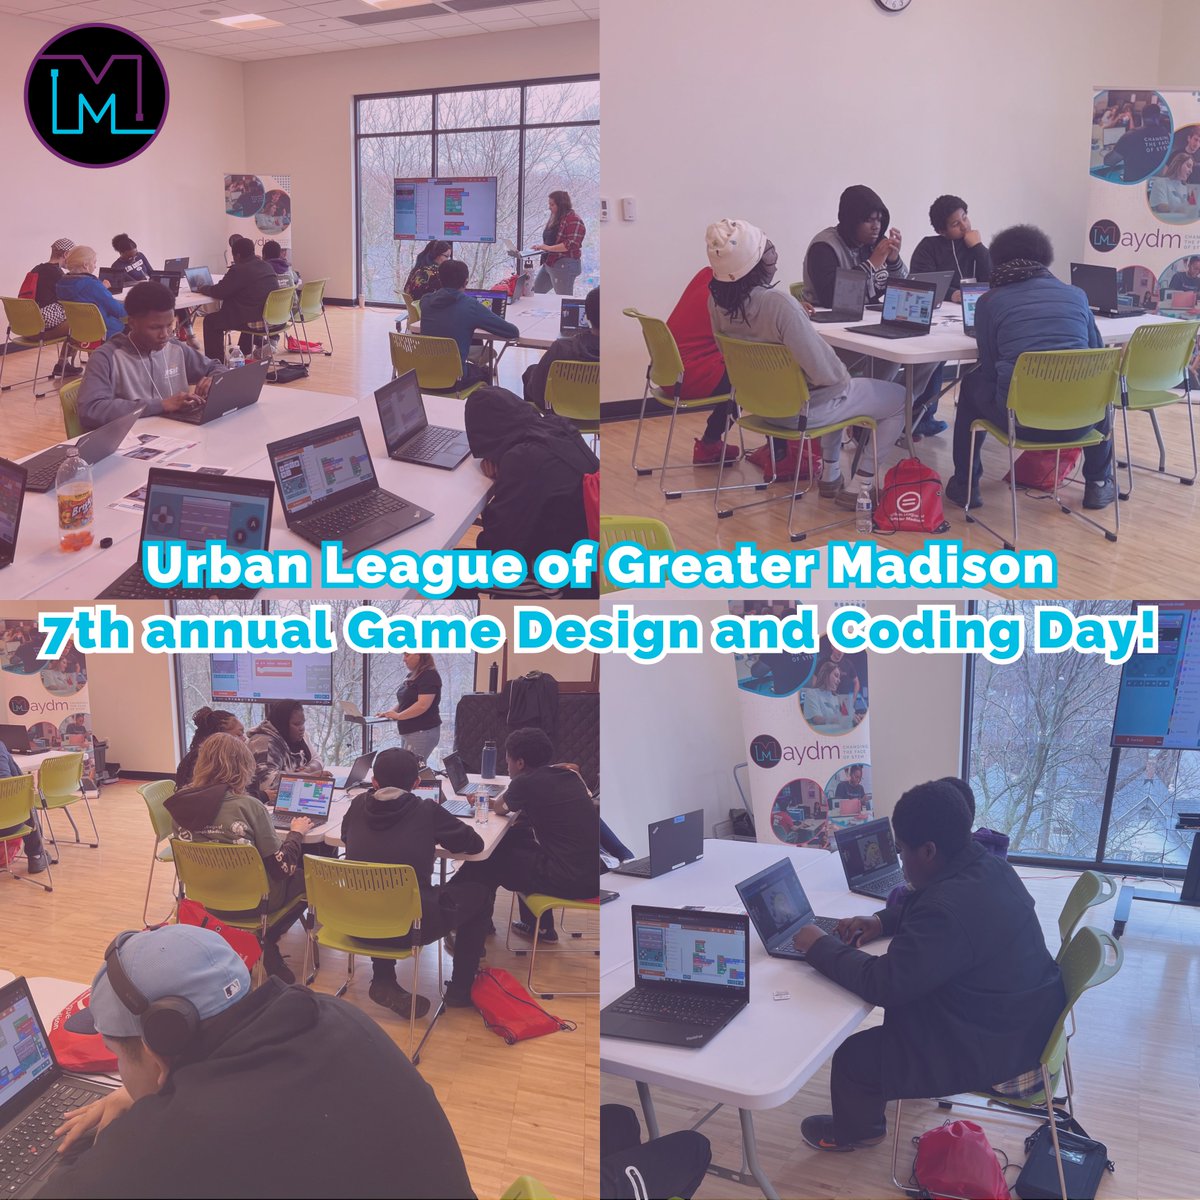 We had a fantastic day teaching middle and high school students about computer coding, video game design, and careers in science, technology, engineering, and math. We are honored to participate in an incredible event bringing STEM education to more Madison youth.